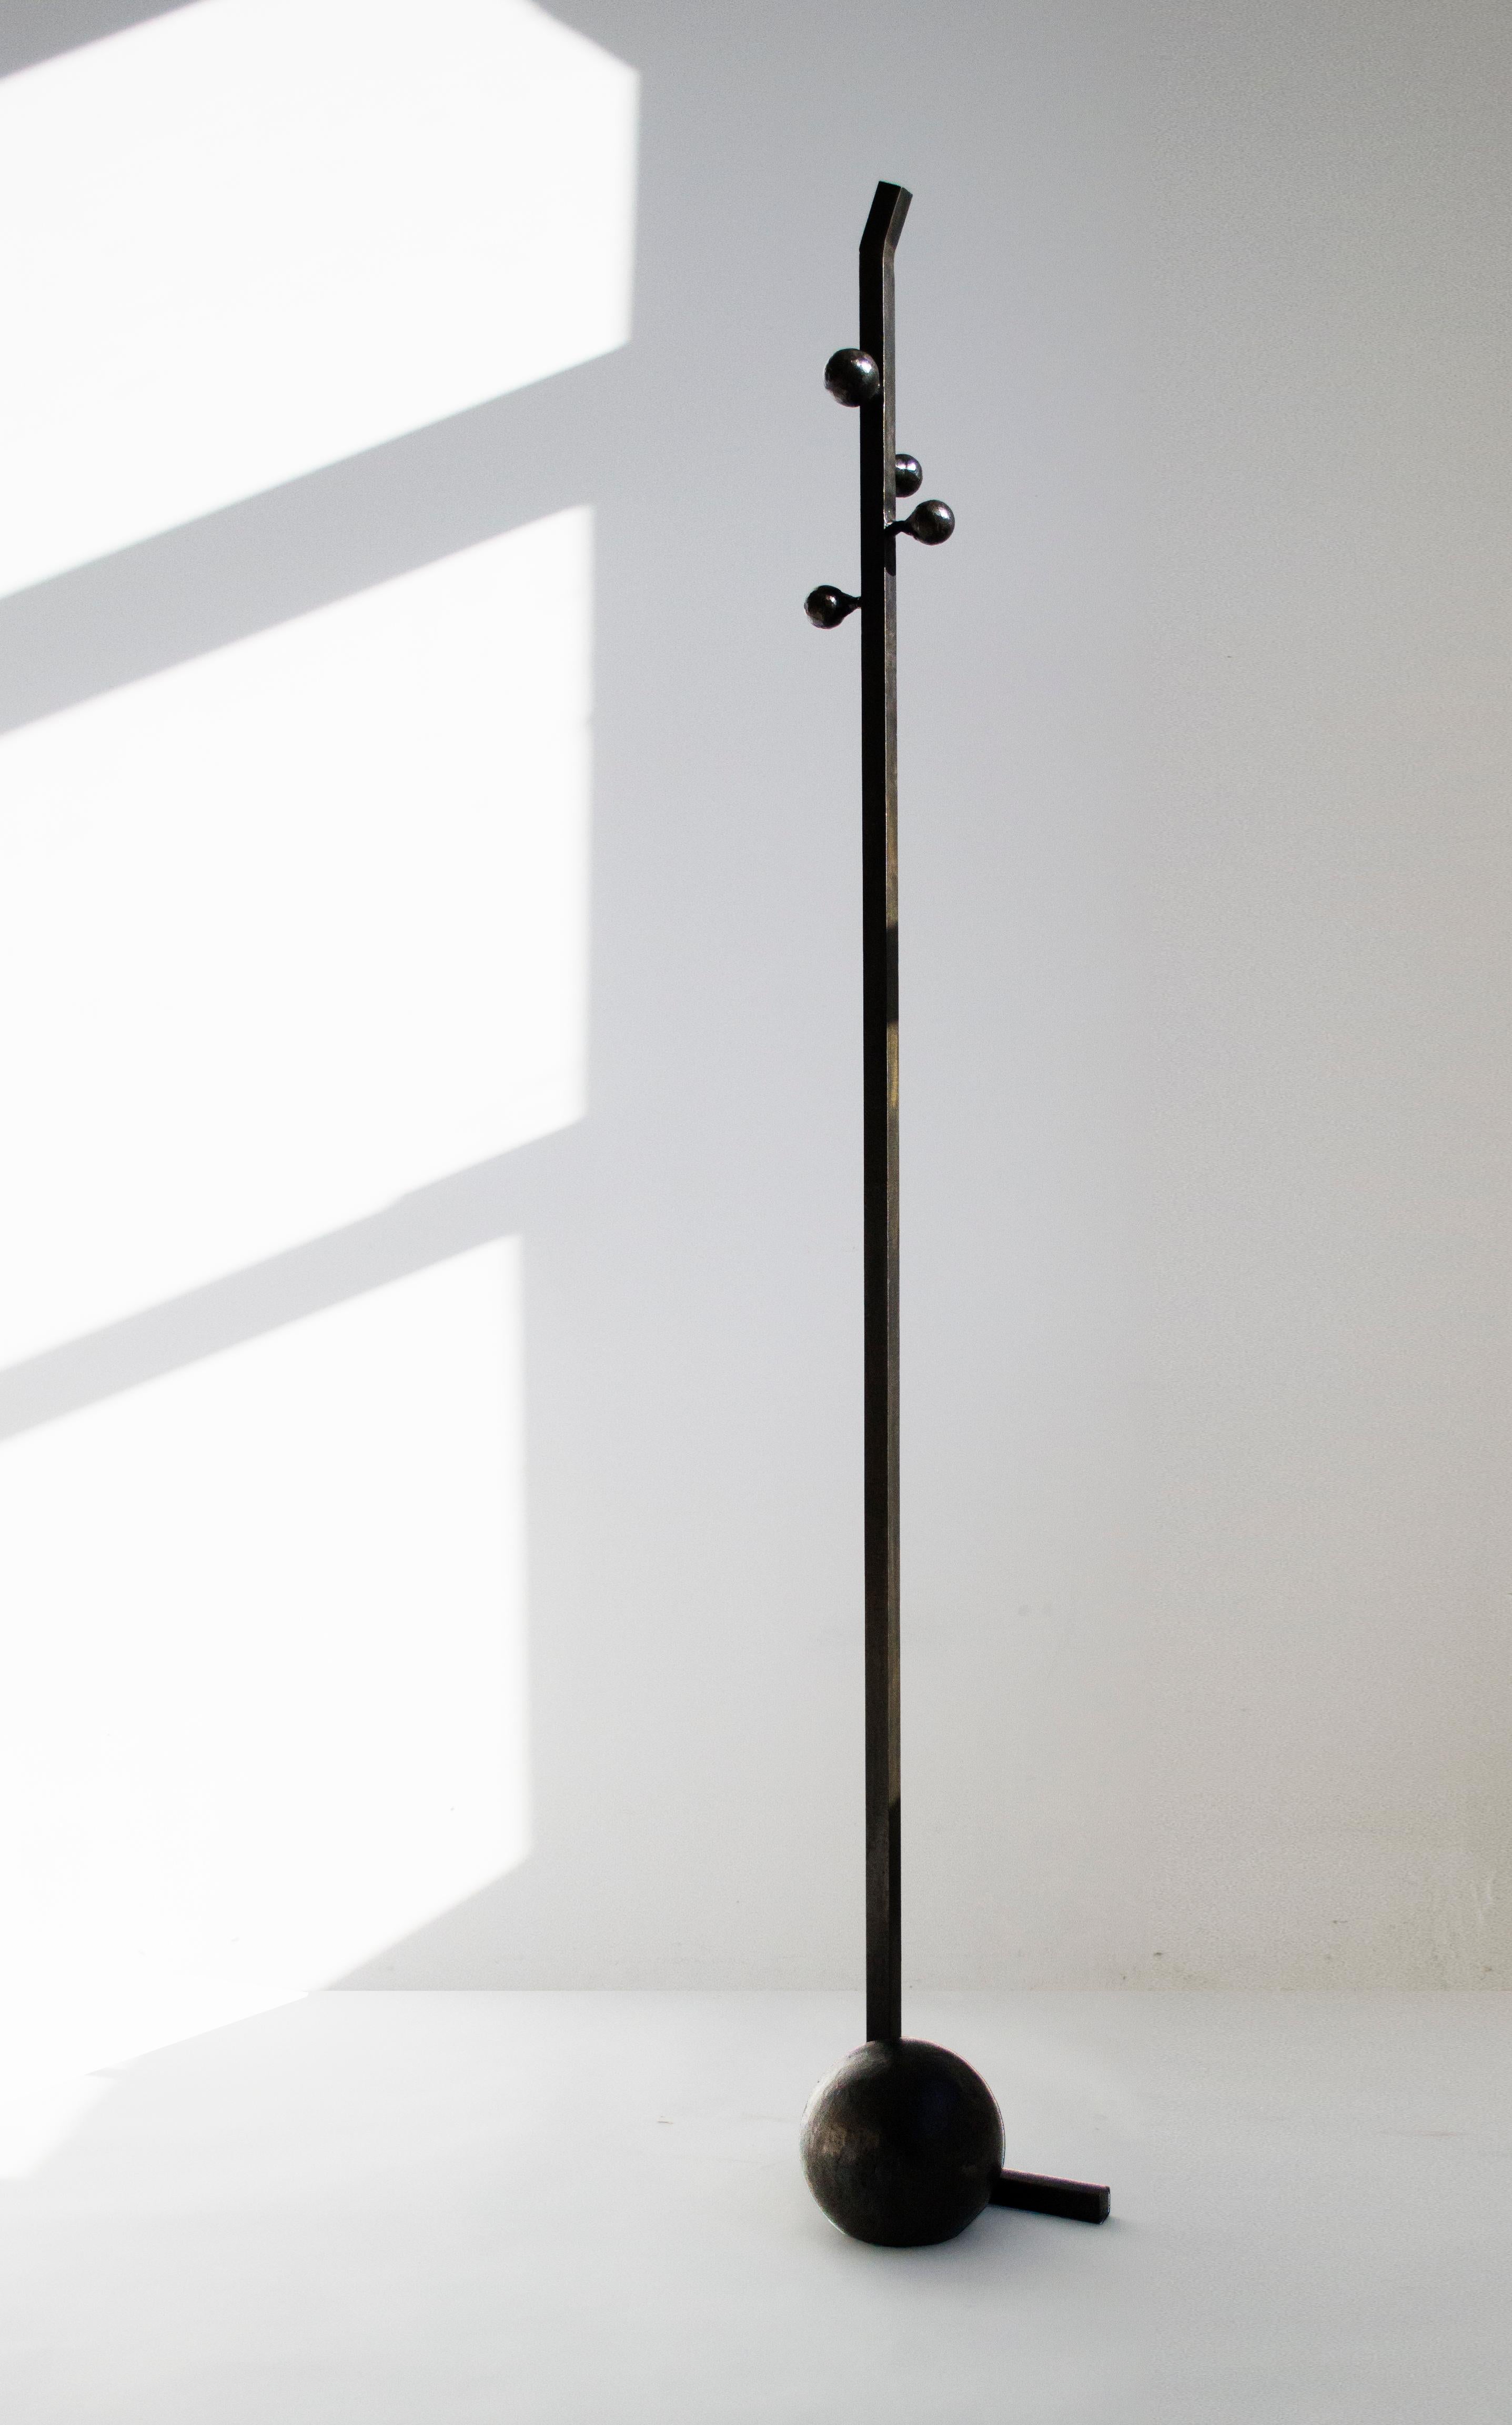 COAT RACK
J.M. Szymanski
d. 2017

This unique coat stand is contemporary sculpture. A solid cast sphere supports a slender stand, which can hold between 5-8 coats on it. 

Made in the Bronx, New York, USA.

Our products are fabricated and finished